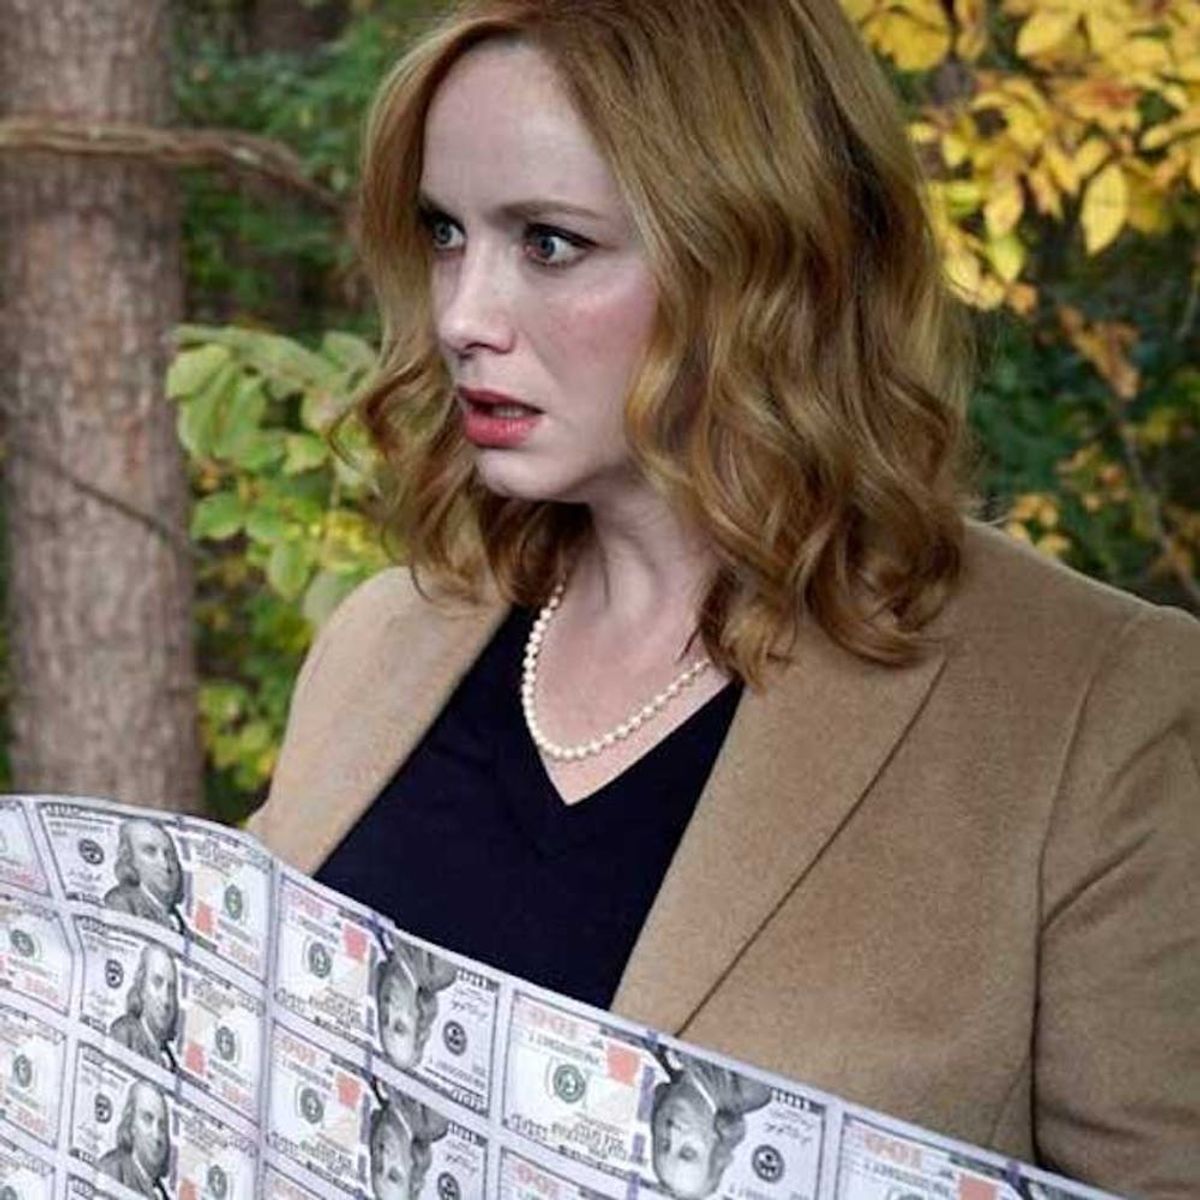 The ‘Good Girls’ Have Found a New Way to Break Bad (and Make Some Money)